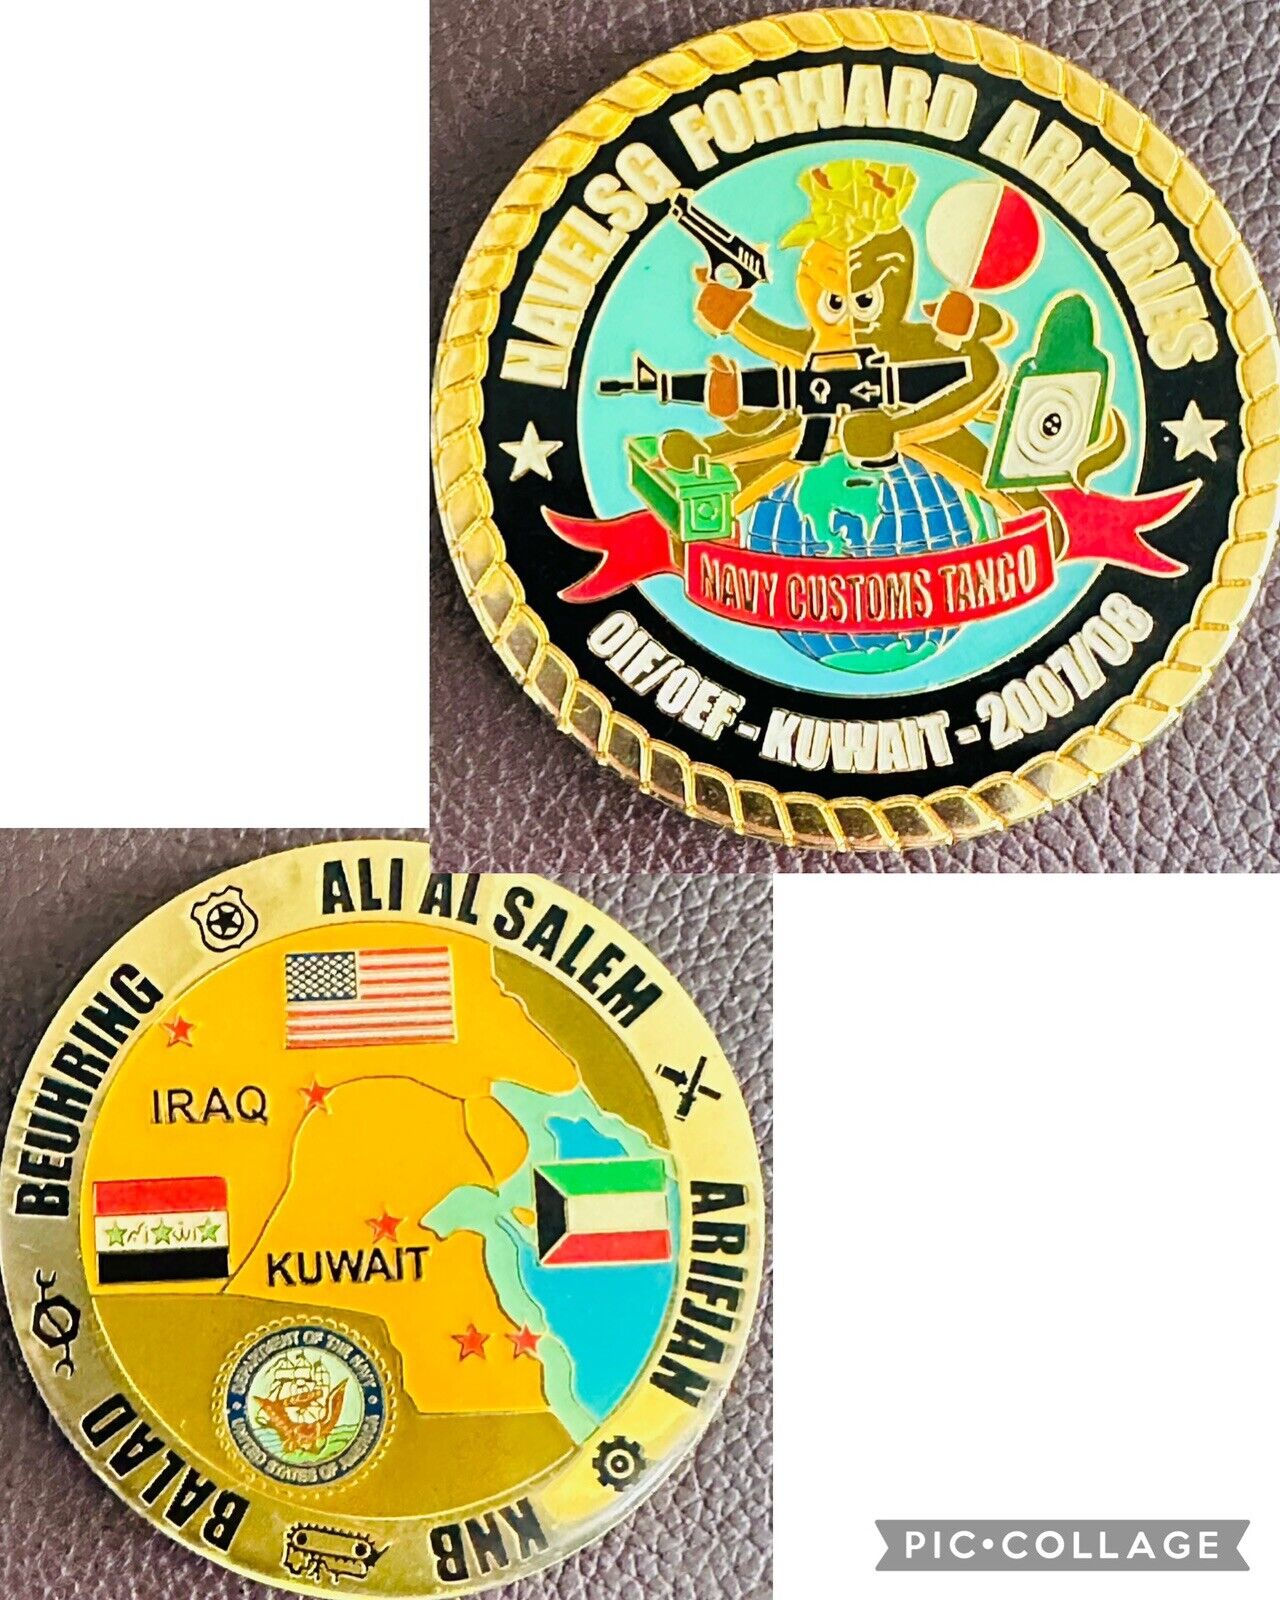 NAVELSG Forward Armories OIF/OEF Kuwait 2007/08 Iraq Beuhring KNB Challenge Coin